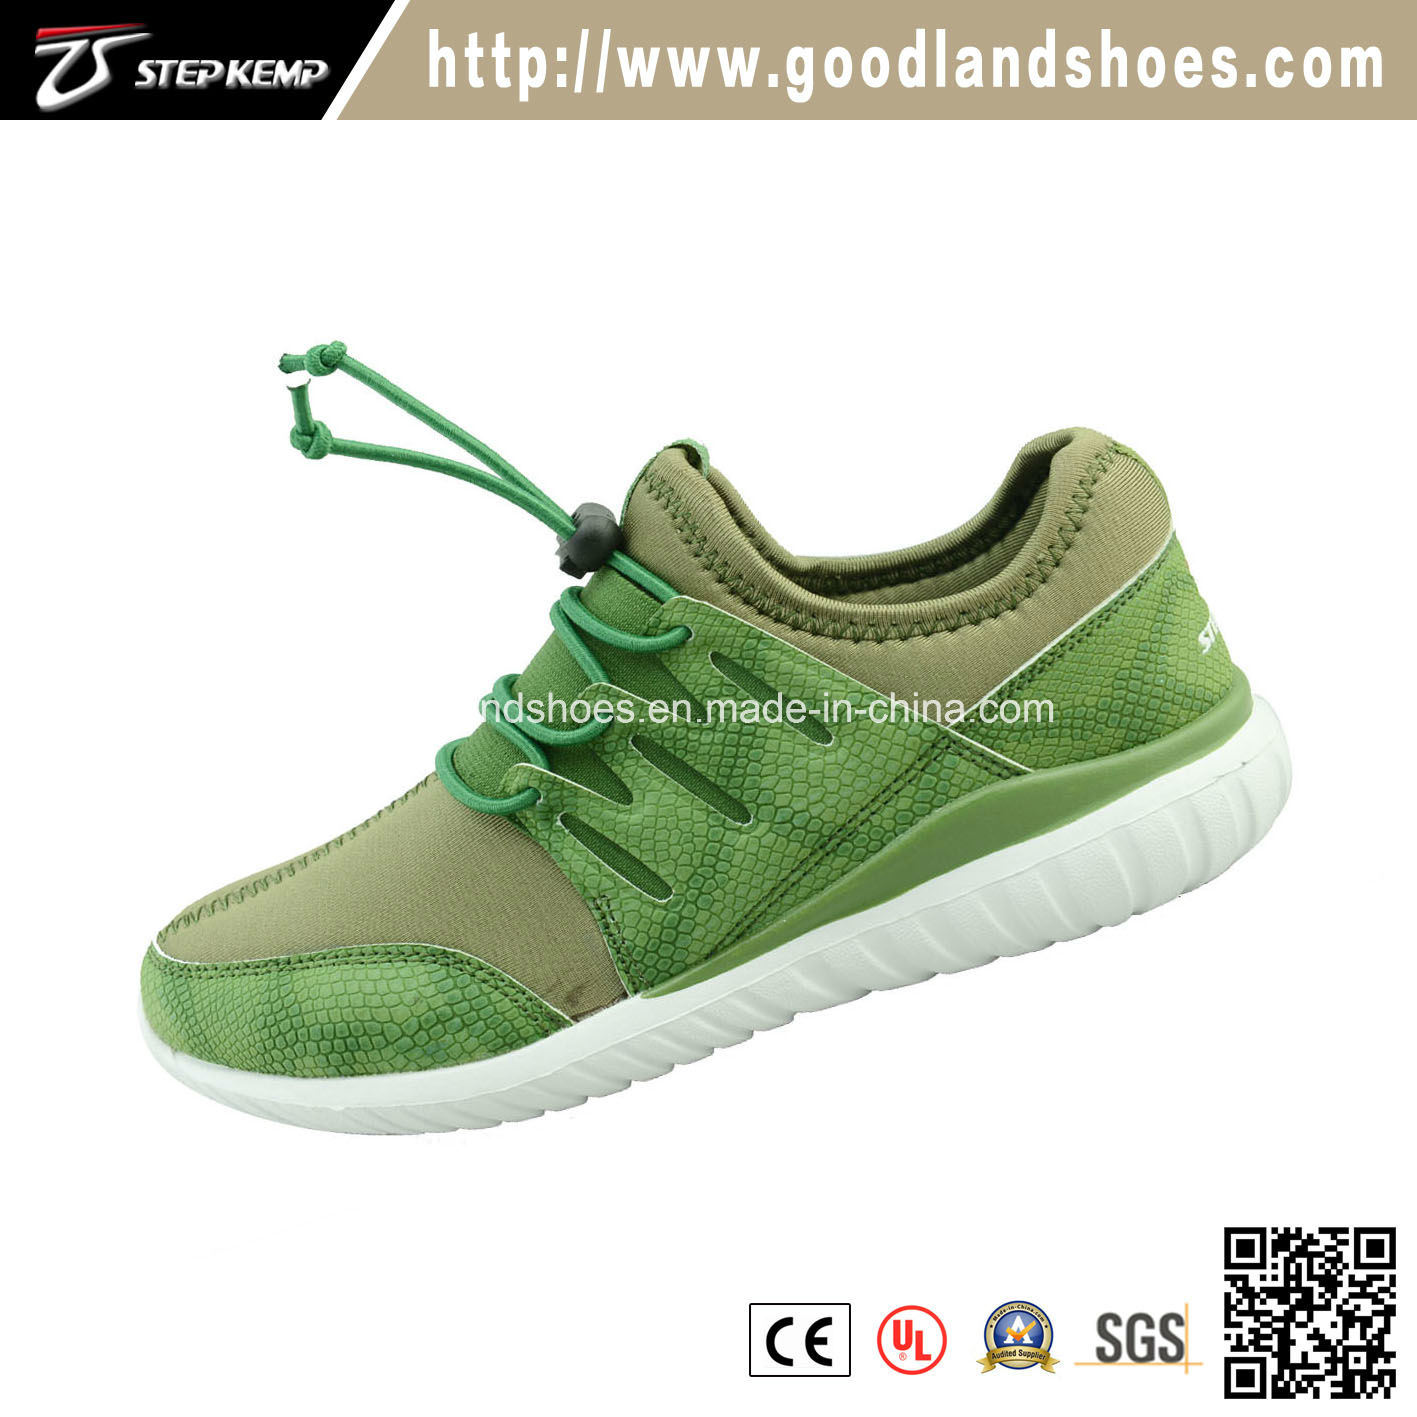 New Arrival Fashion Running Children Shoes From Goodlandshoes (16014)